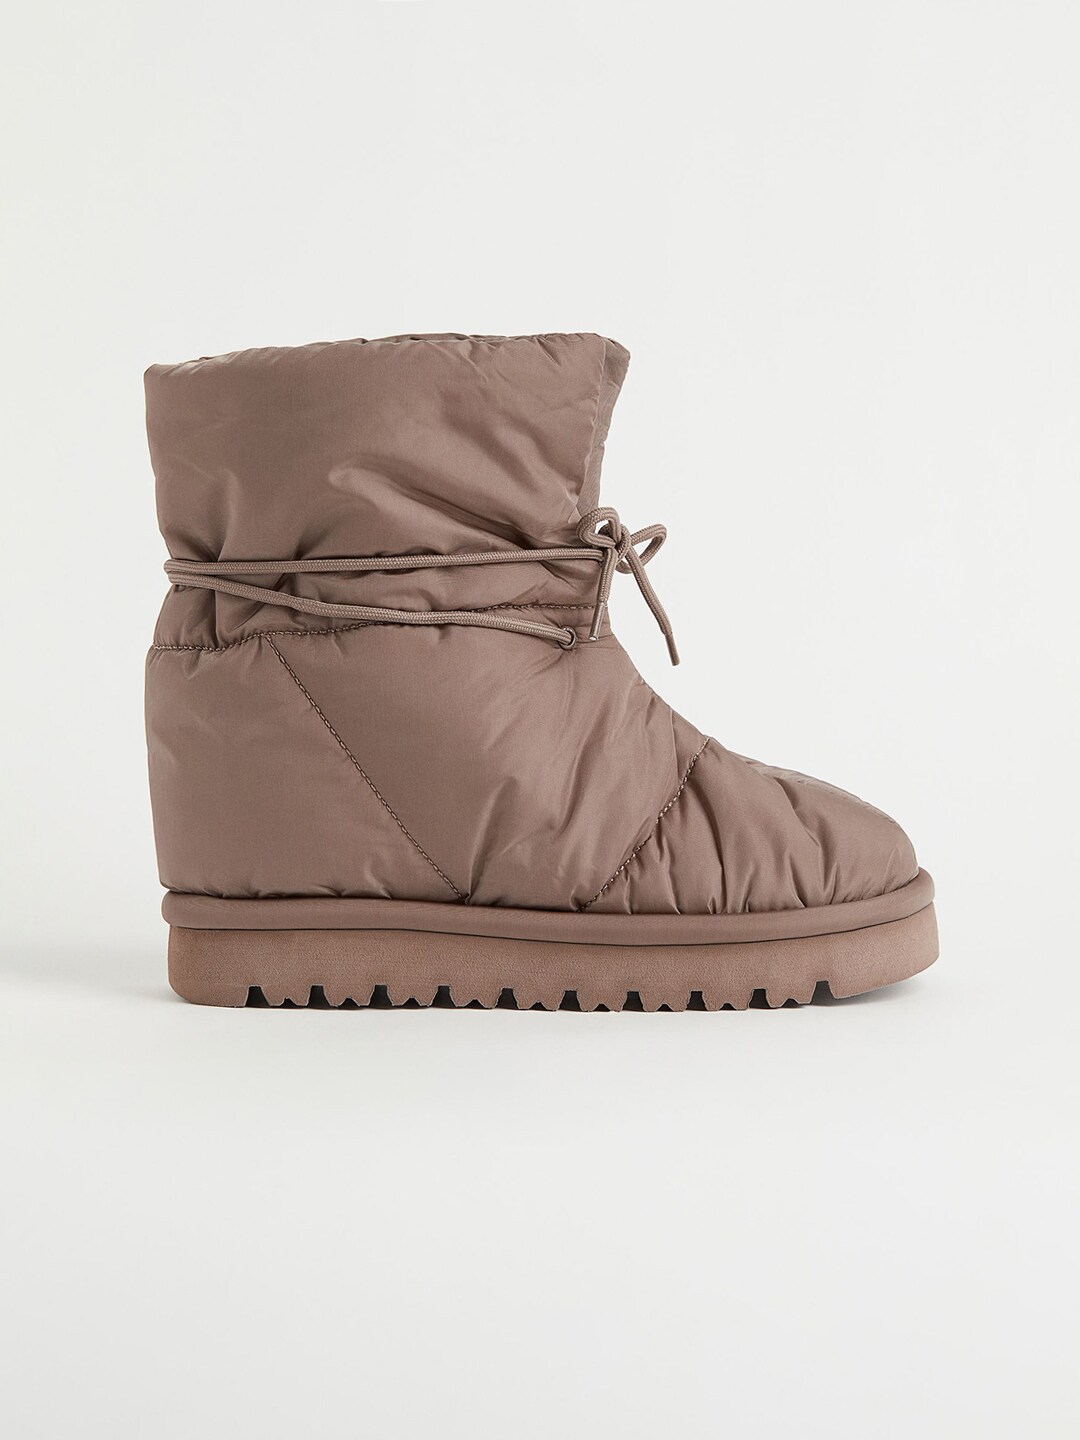 H&M Women Beige Ankle-Laced Nylon Boots Price in India